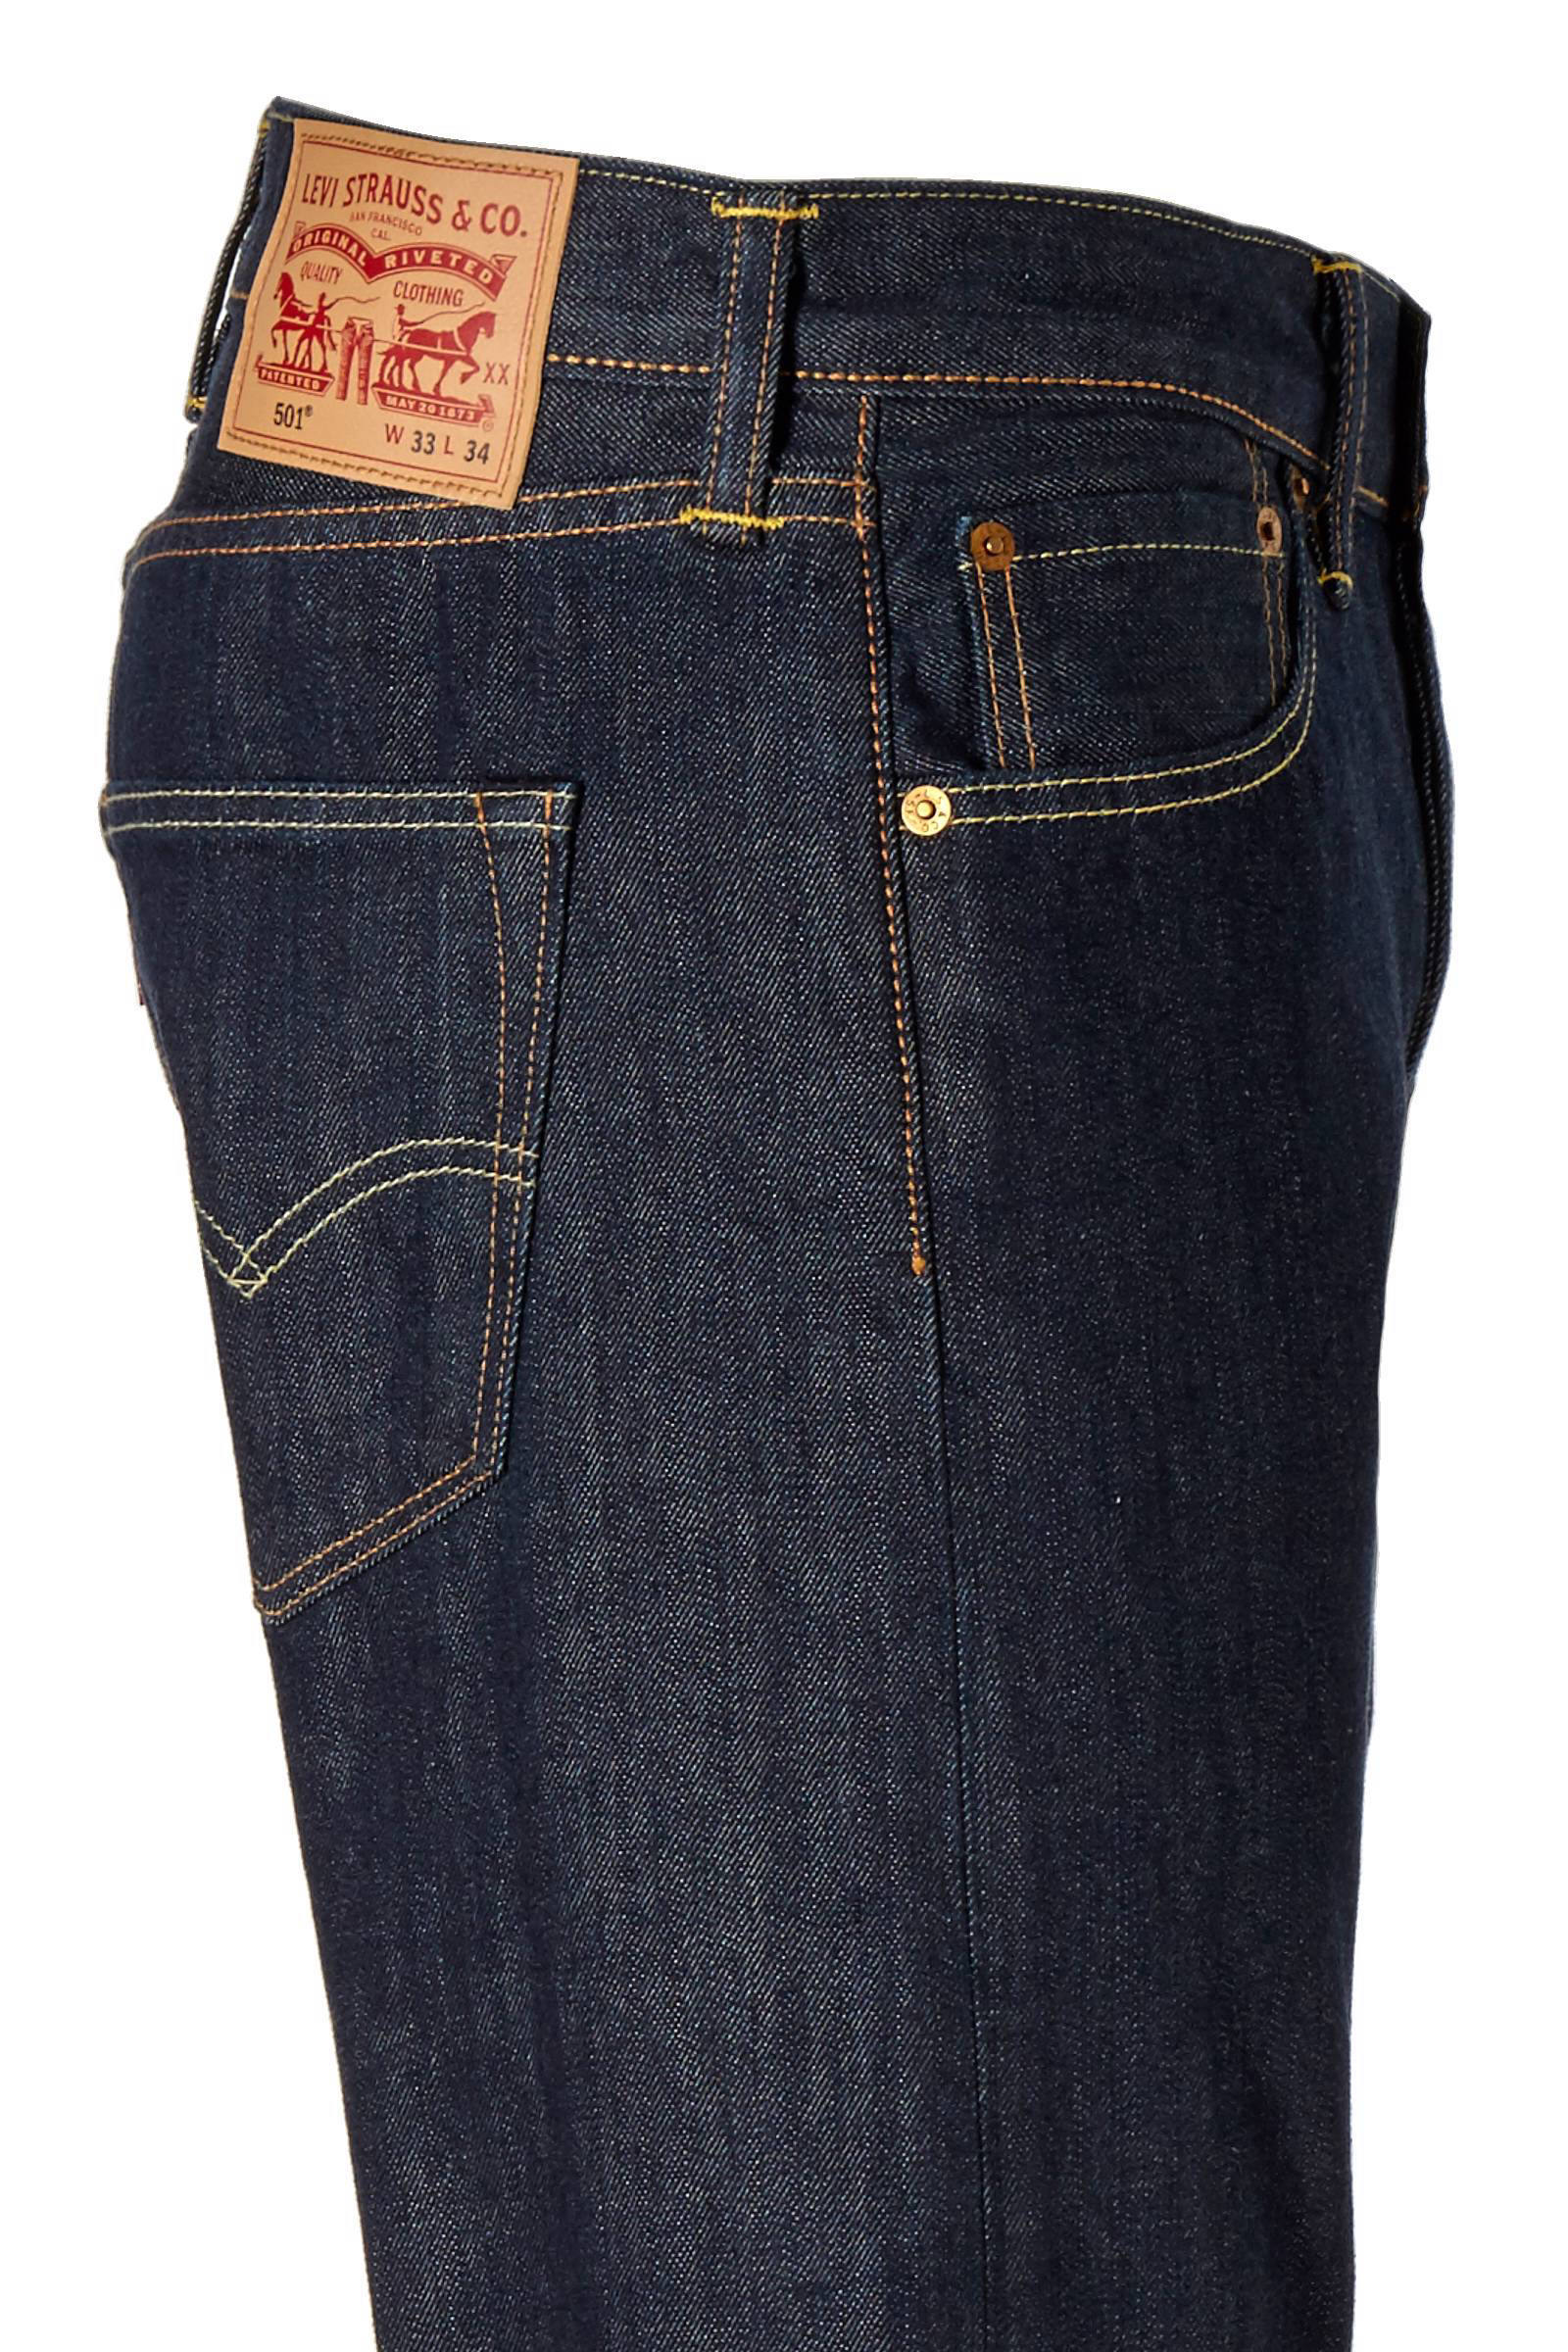 jeans that fit like levi's 501